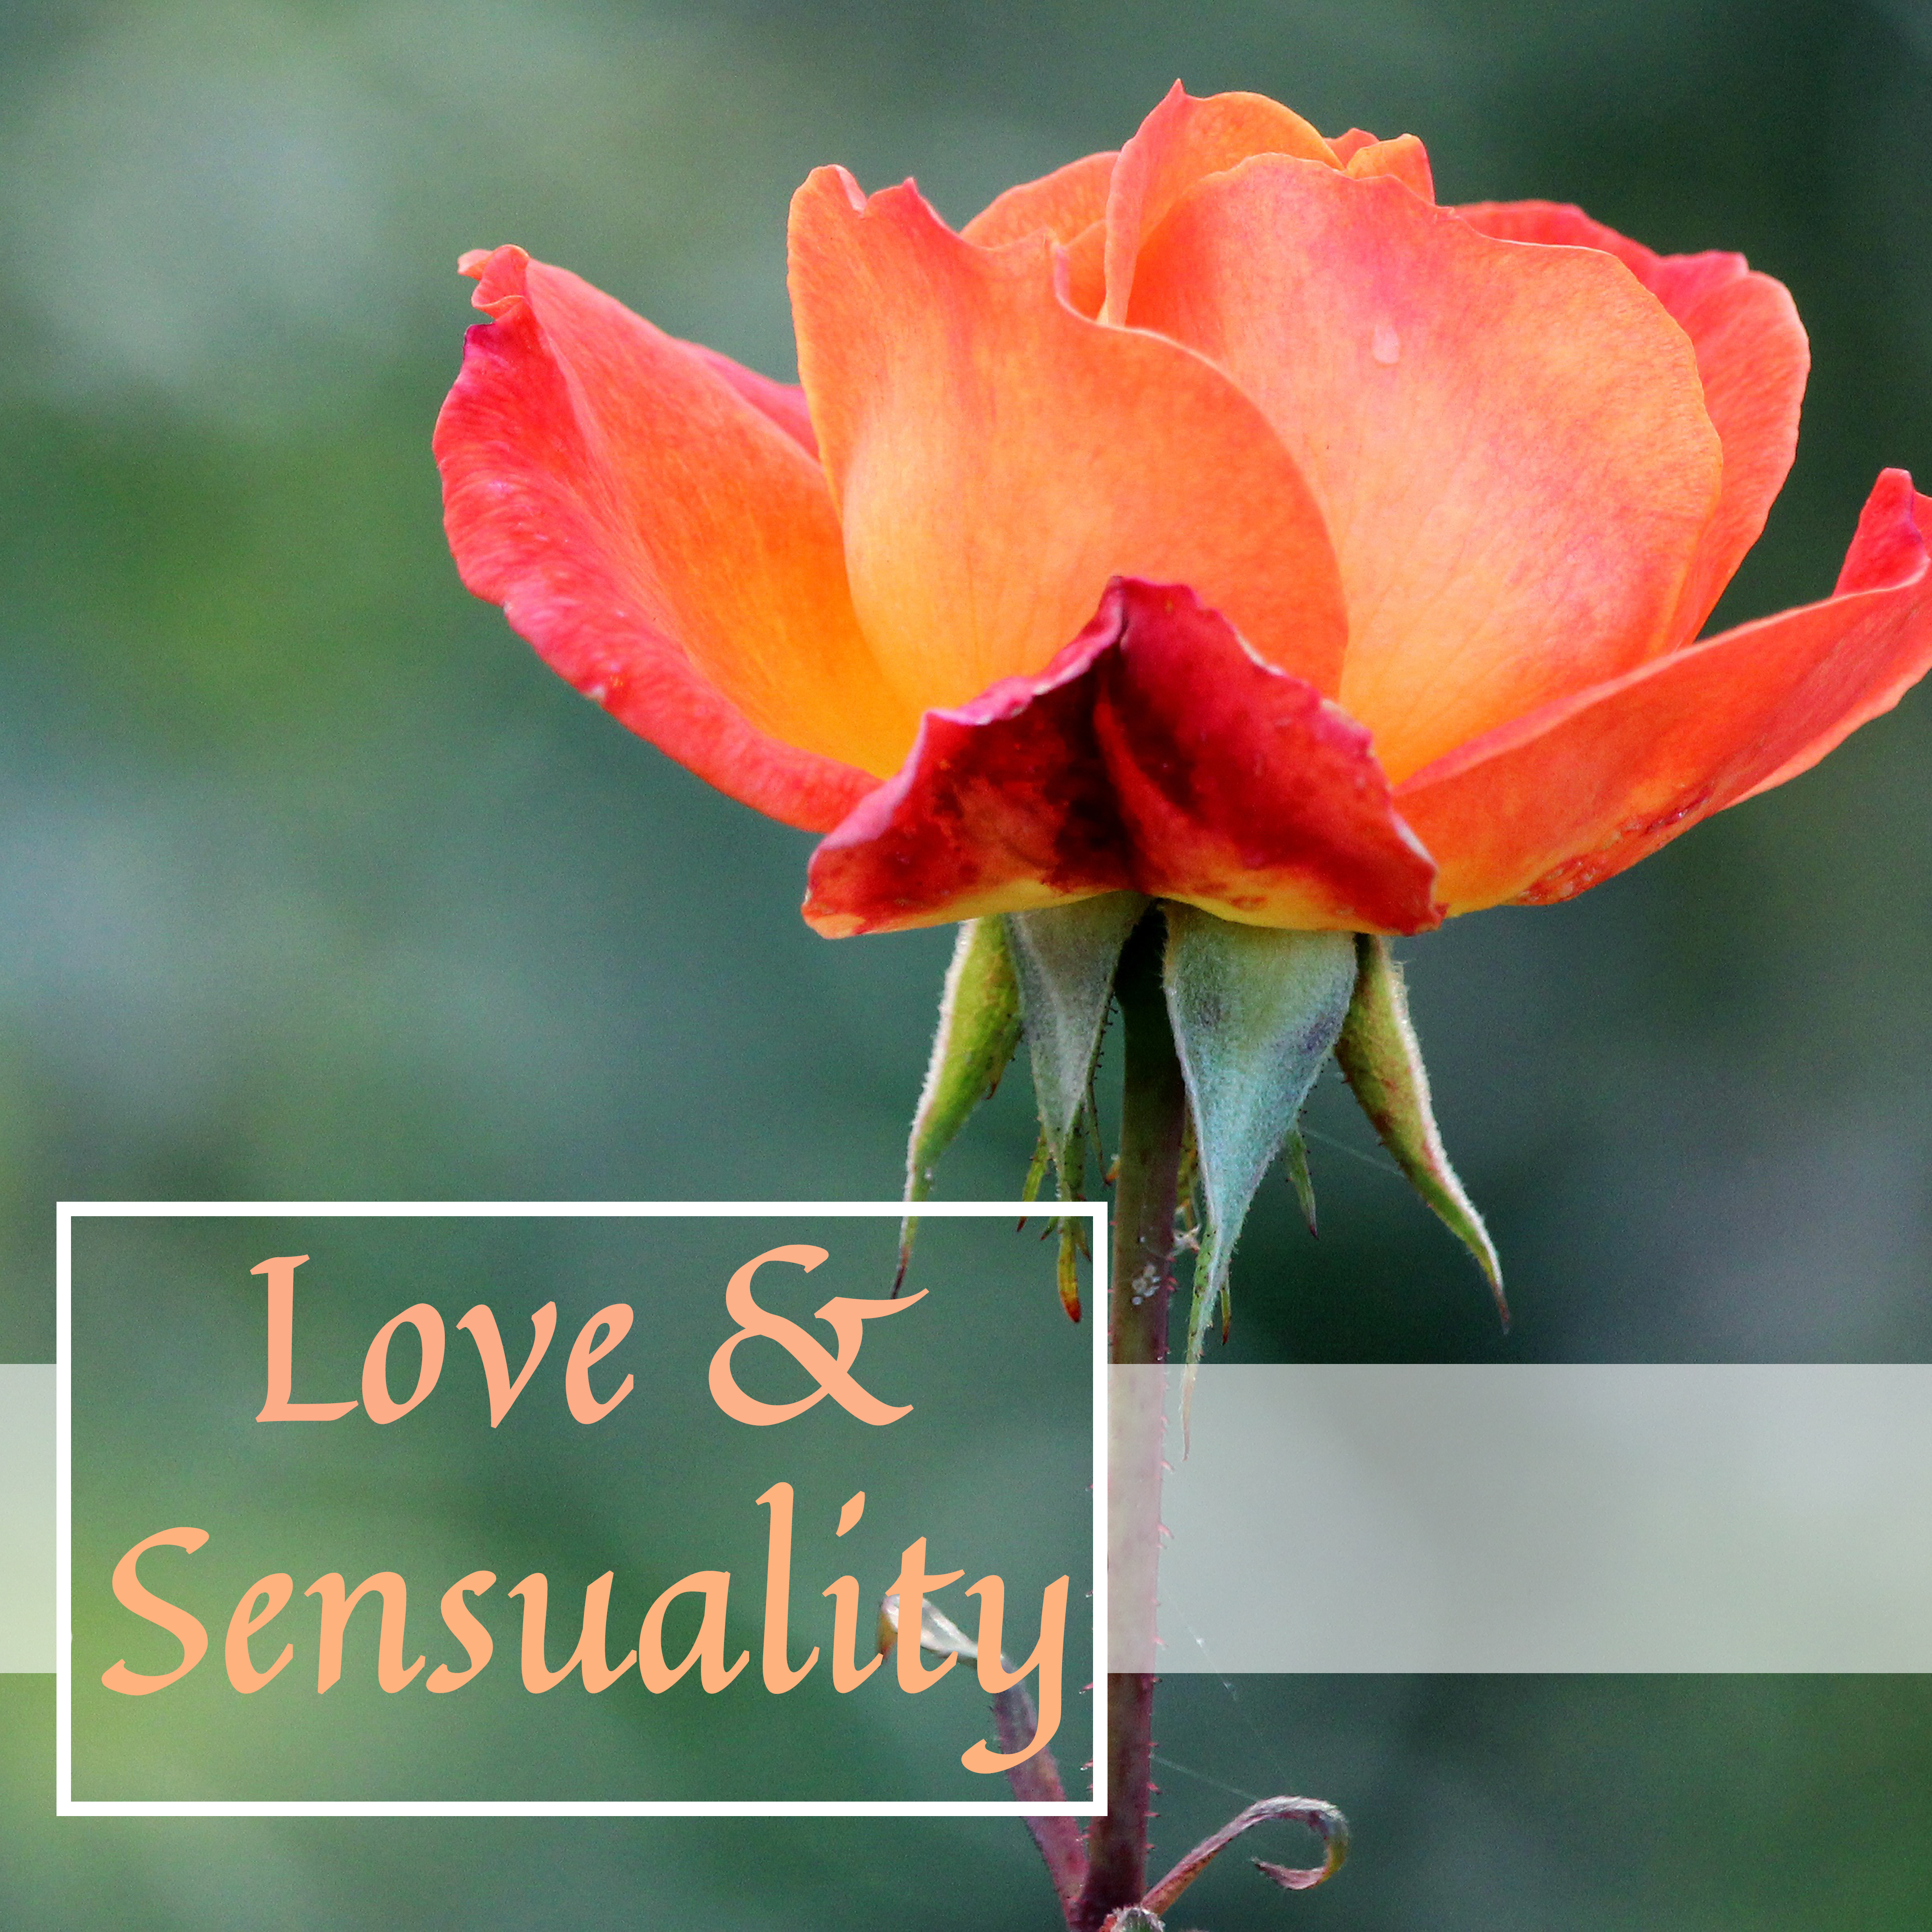 Love & Sensuality – Jazz for Lovers, Sensual Jazz Music, Heart Sounds, Smooth Jazz for Romantic Evening, True Love